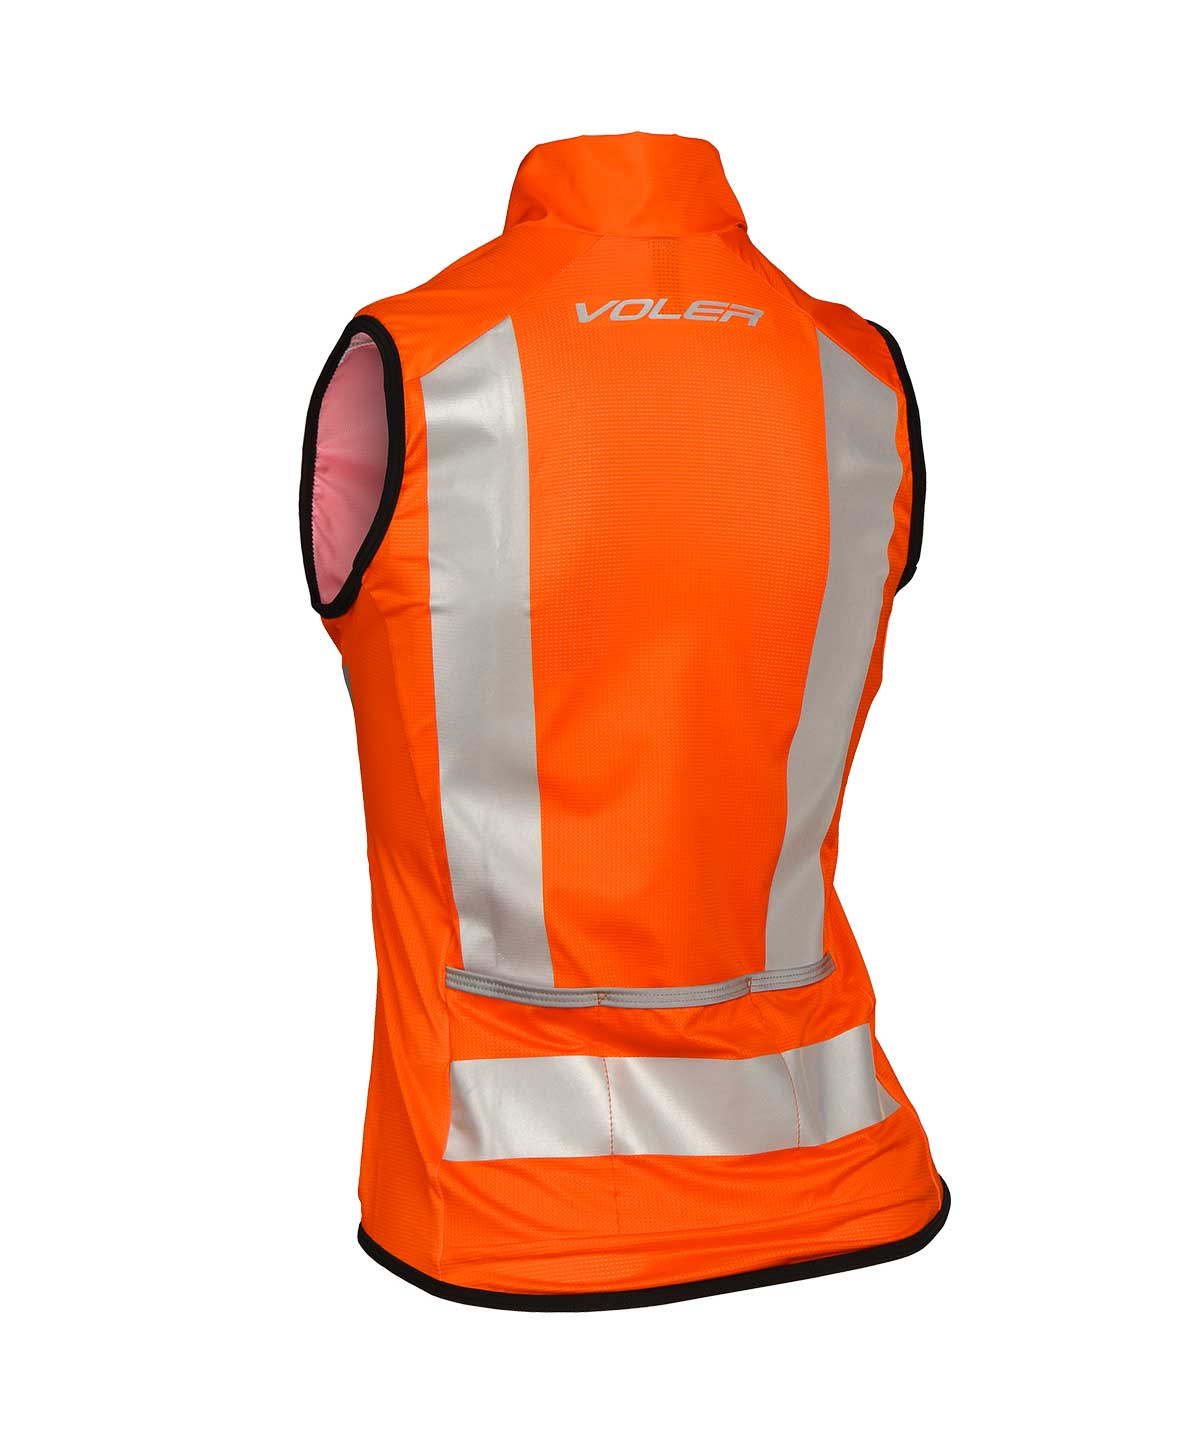 Cycling High Visibility Safety Vest - Neon Orange